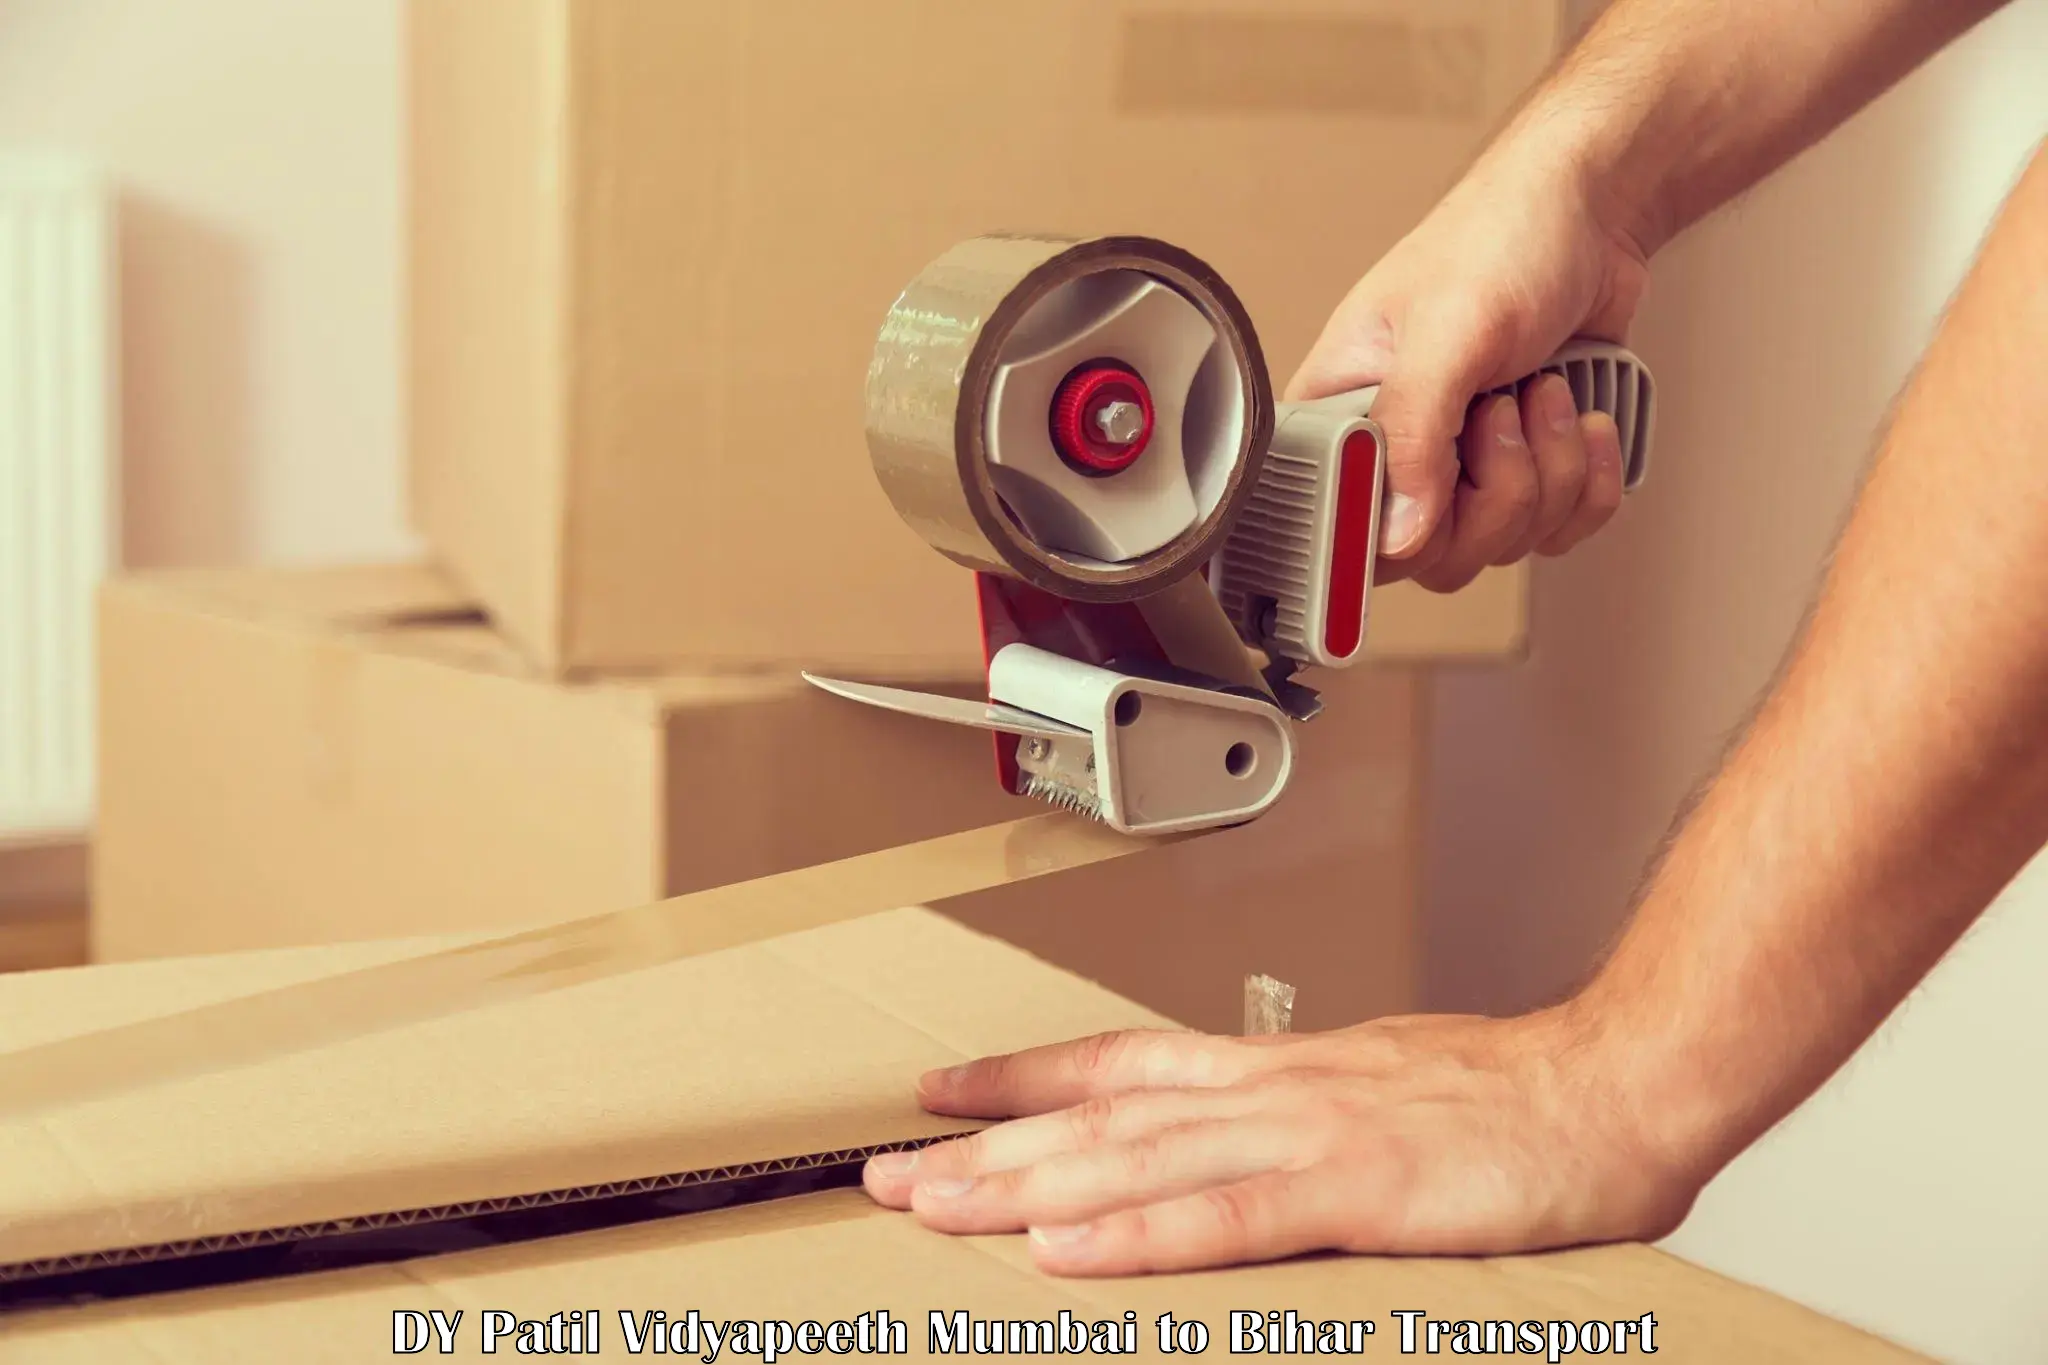 Package delivery services DY Patil Vidyapeeth Mumbai to Katihar